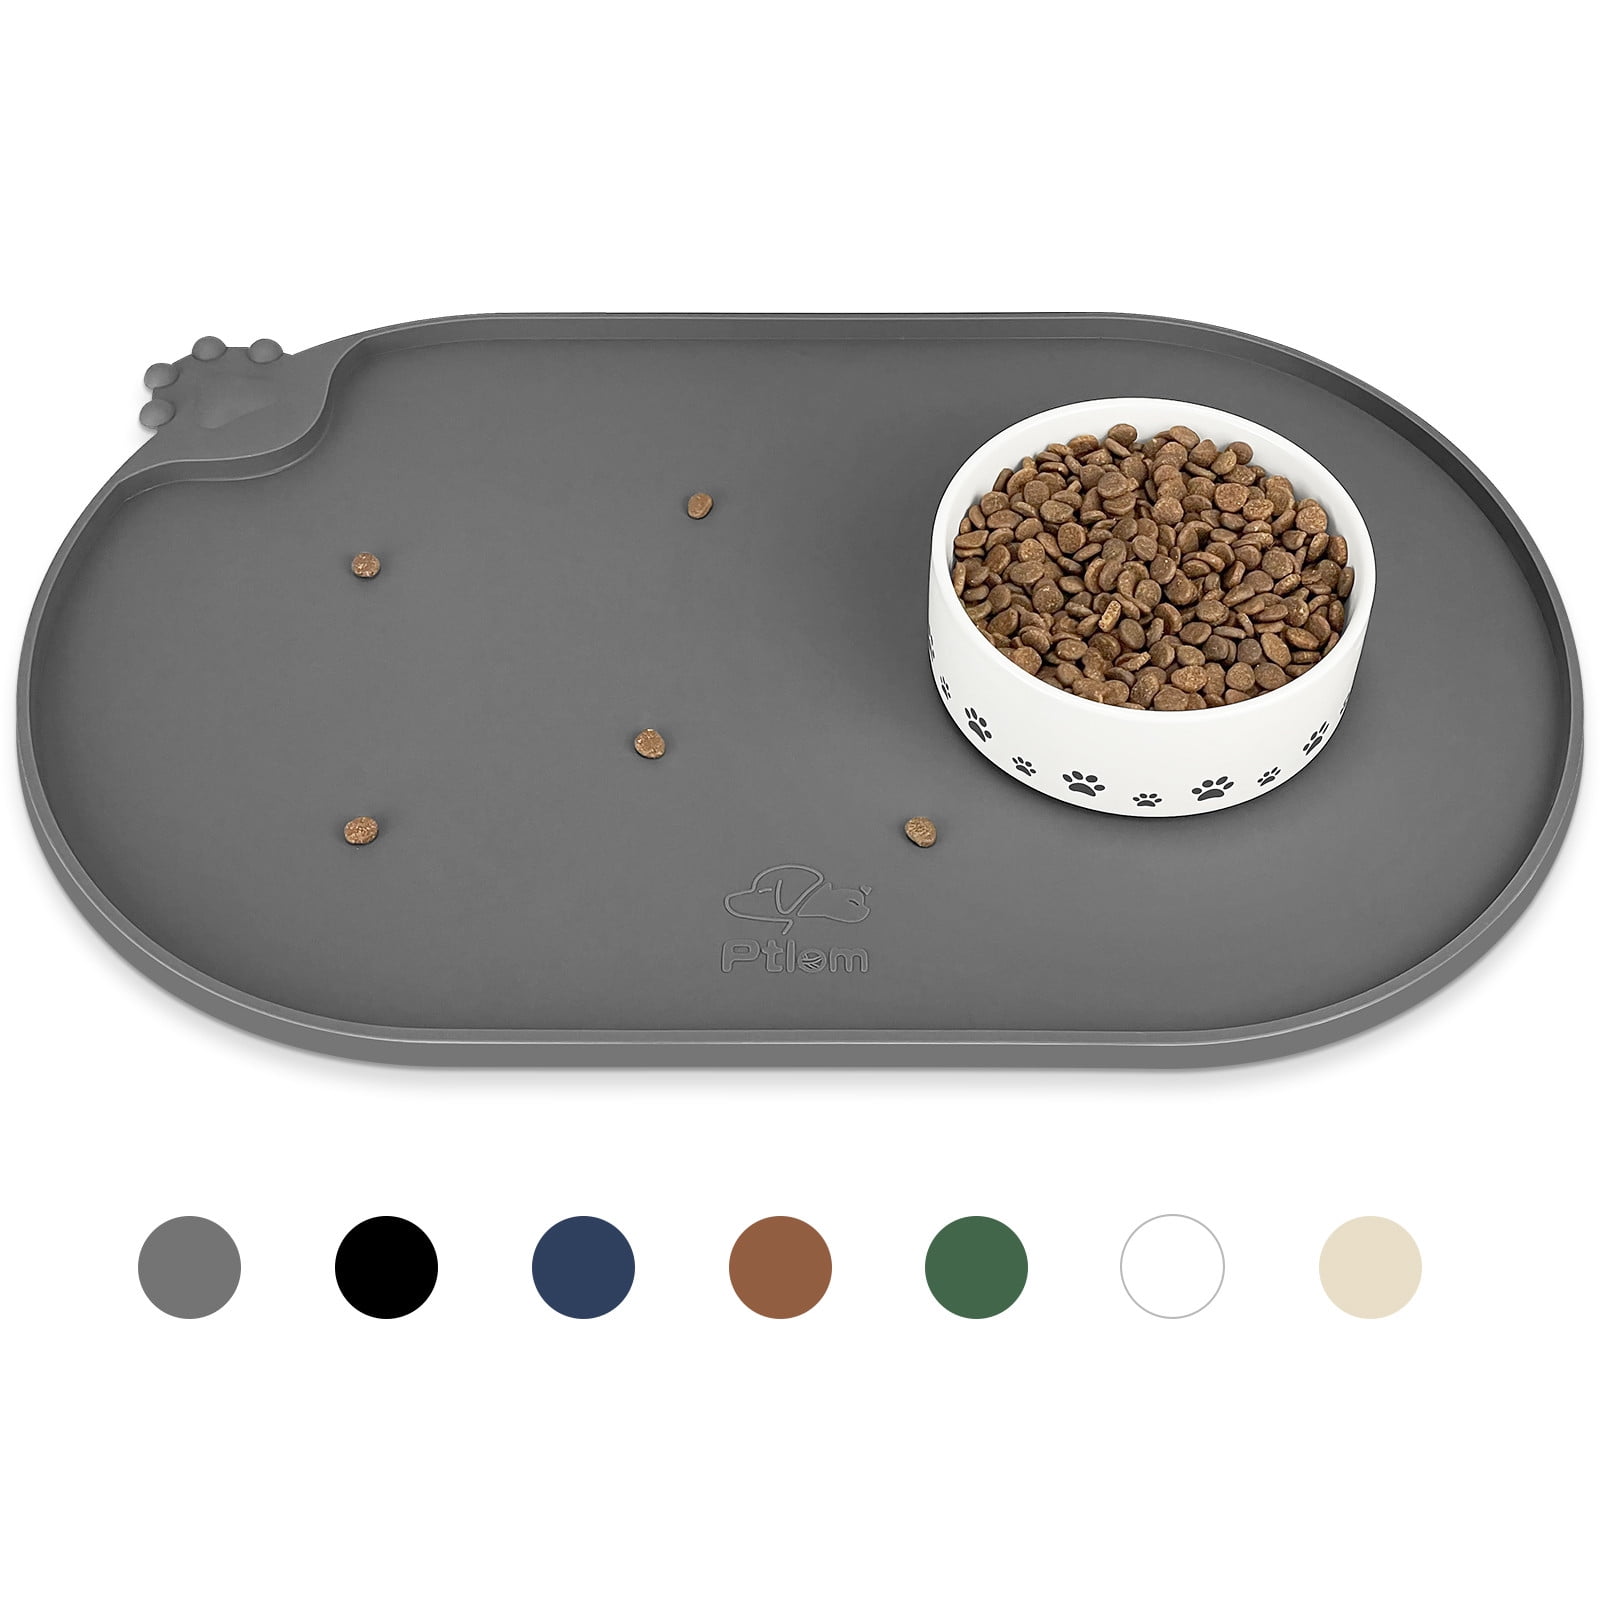 Yinuomo Non Slip Dog Food Mat, Waterproof Placemat for Cats Bowl